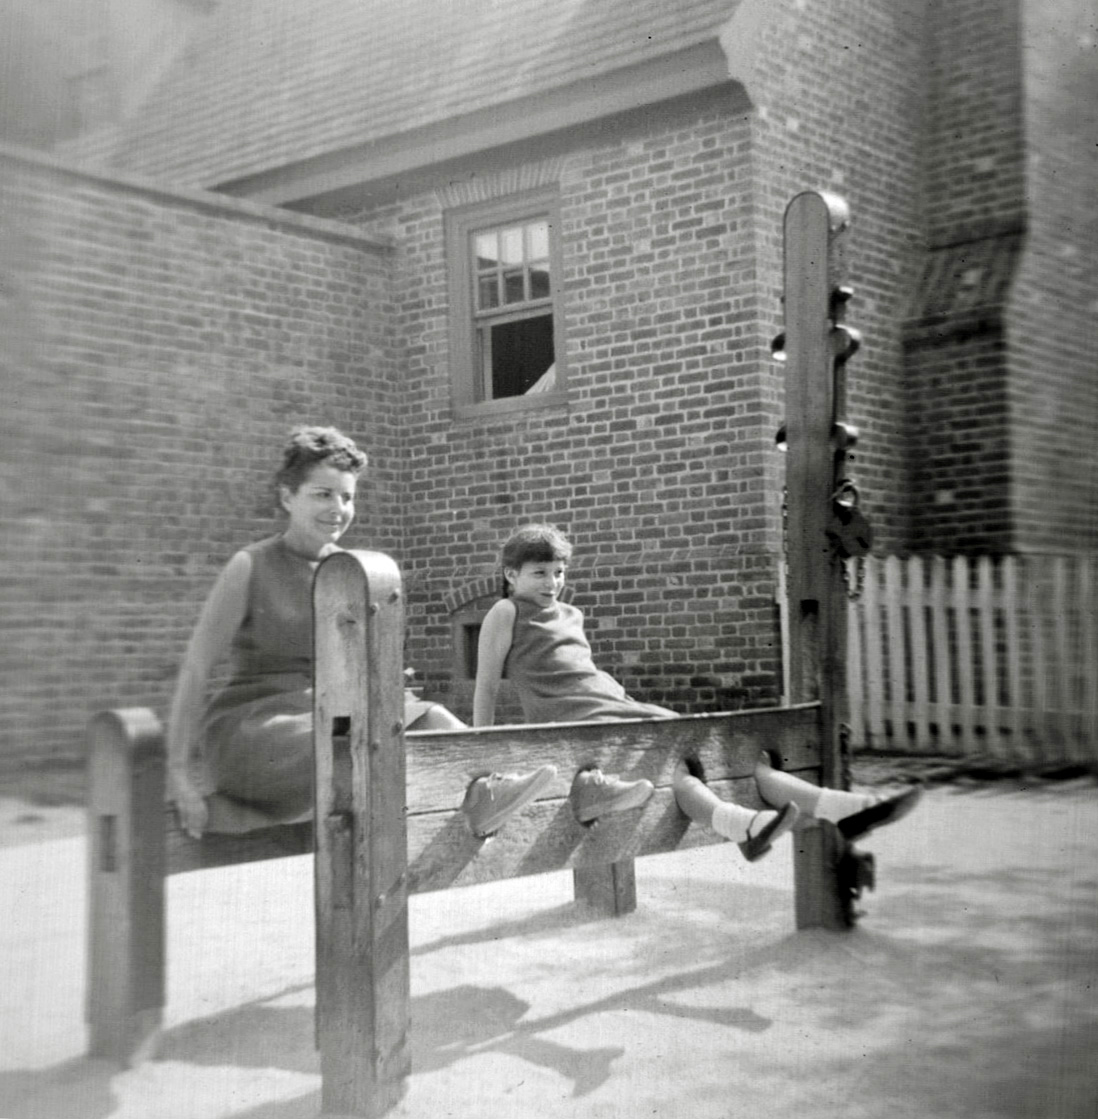 On Labor Day Weekend, just before I started fifth grade, my parents took me on an educational vacation to Colonial Williamsburg. There we did the basic tourist things that one does in Williamsburg, including pose for pictures in the stocks. It was one of many times I and my mother wore the matching red dresses she had made. My brother did not go with us because he was too little. He was left with a family that my father knew from work.